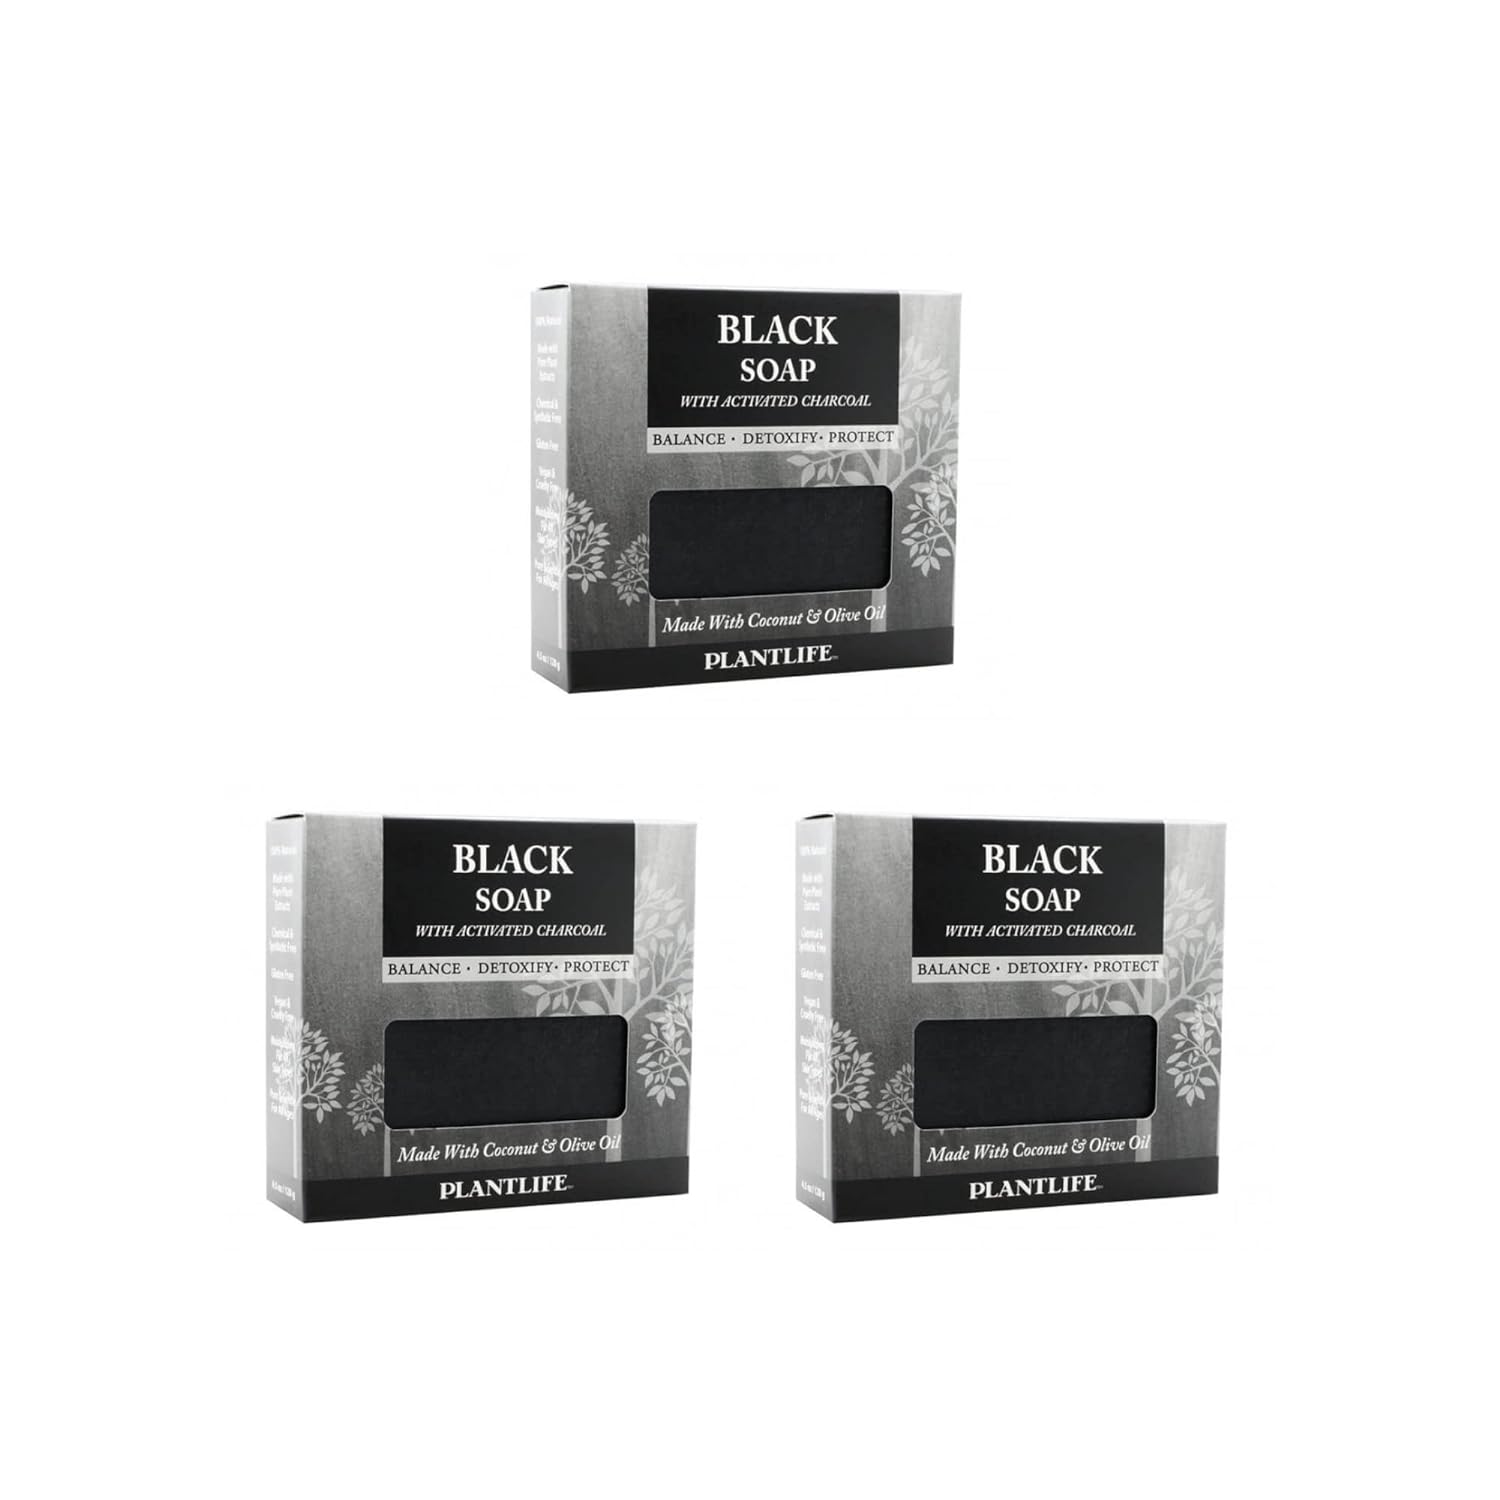 Plantlife Black 3-Pack Bar Soap - Moisturizing and Soothing Soap for Your Skin - Hand Crafted Using Plant-Based Ingredients - Made in California 4.5 Bar